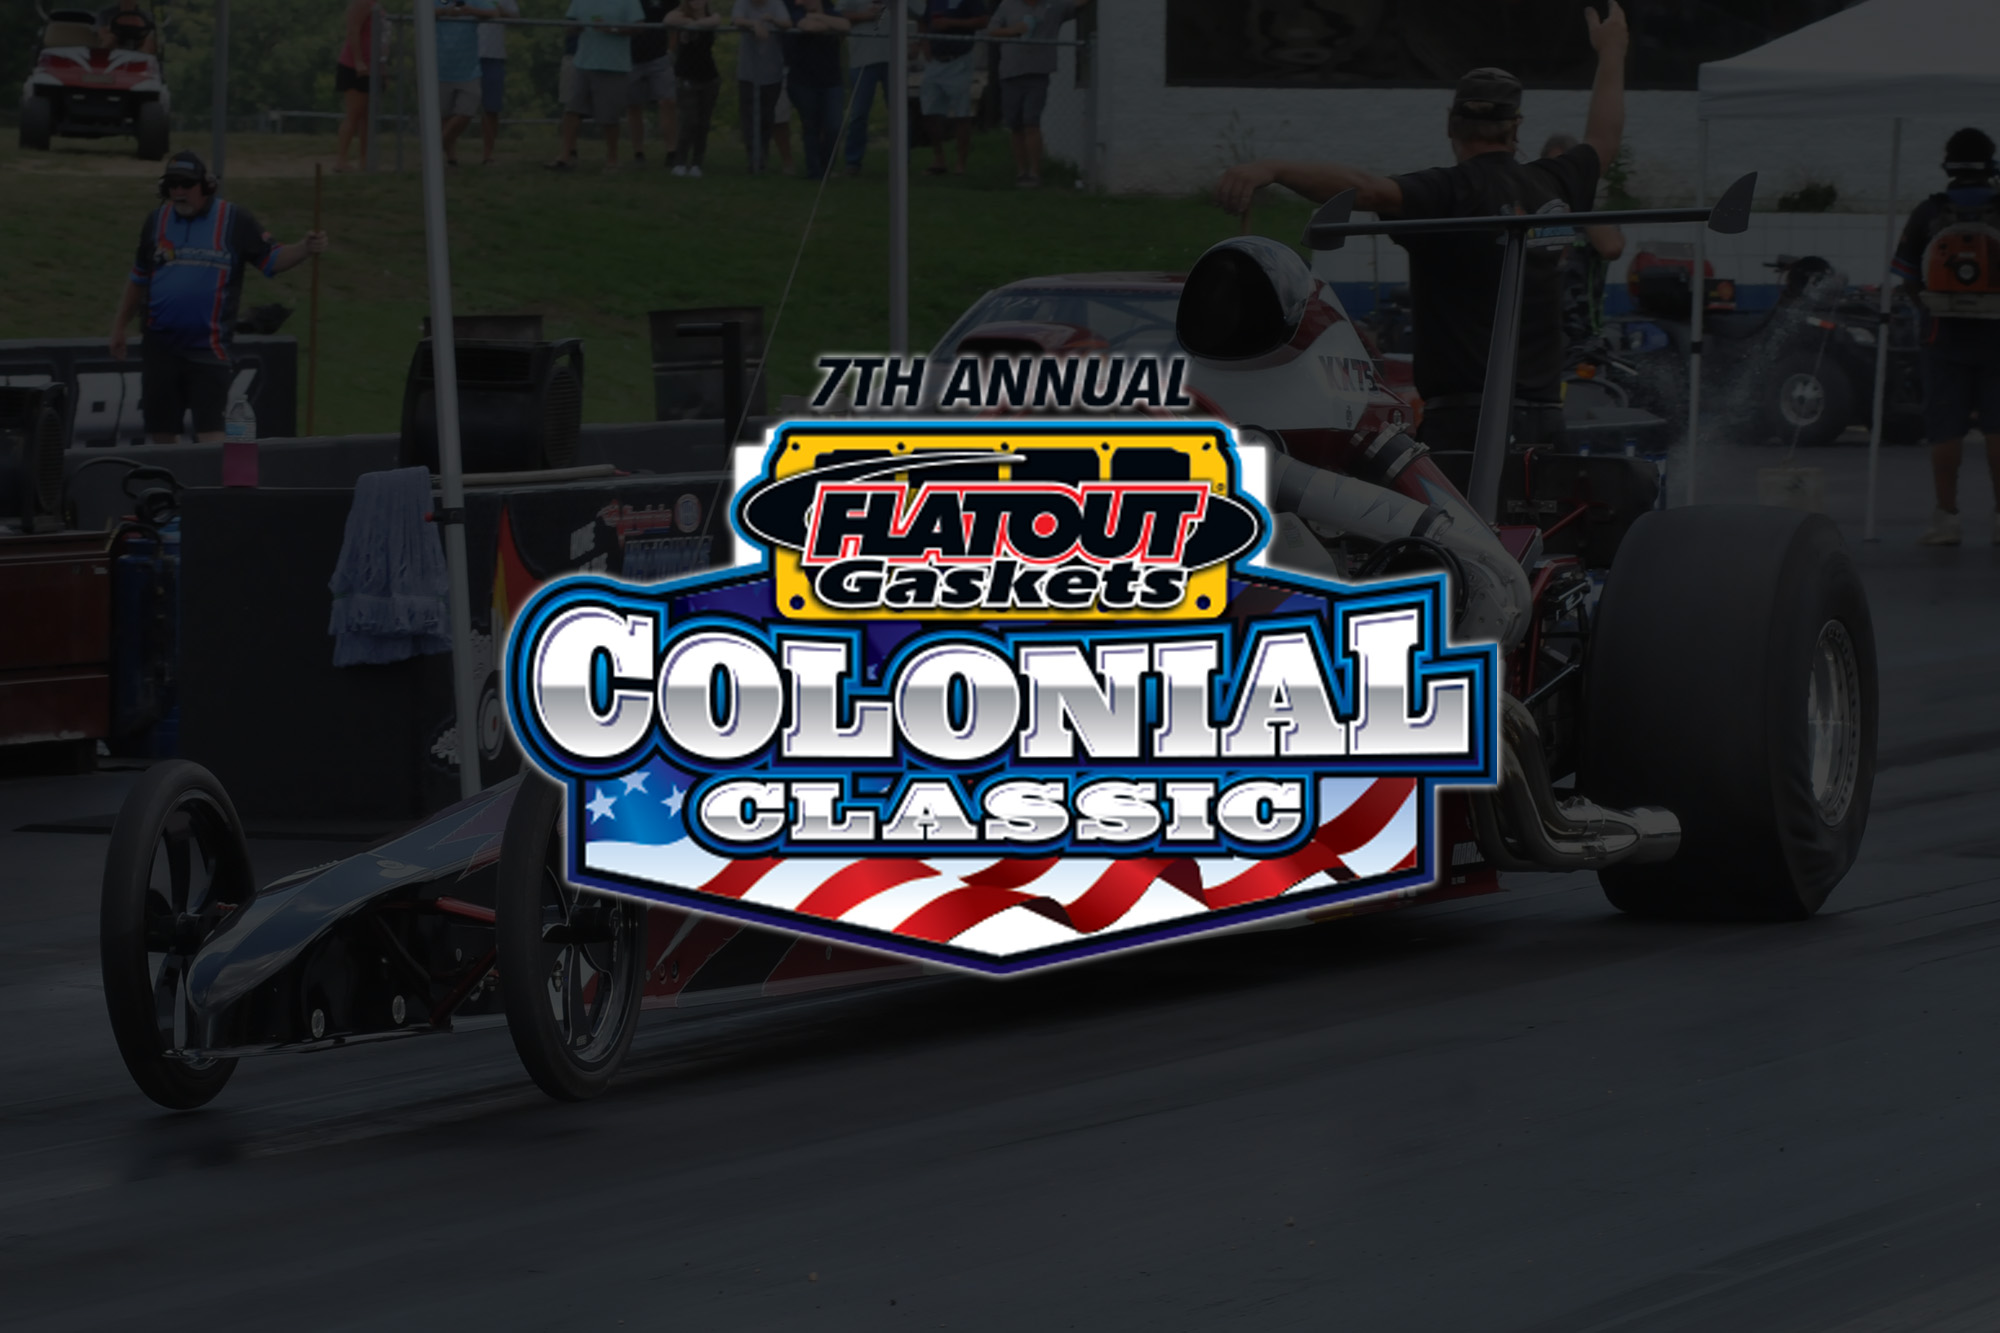 Hoff and Sexton Grab Victories at Loose Rocker’s Colonial Classic